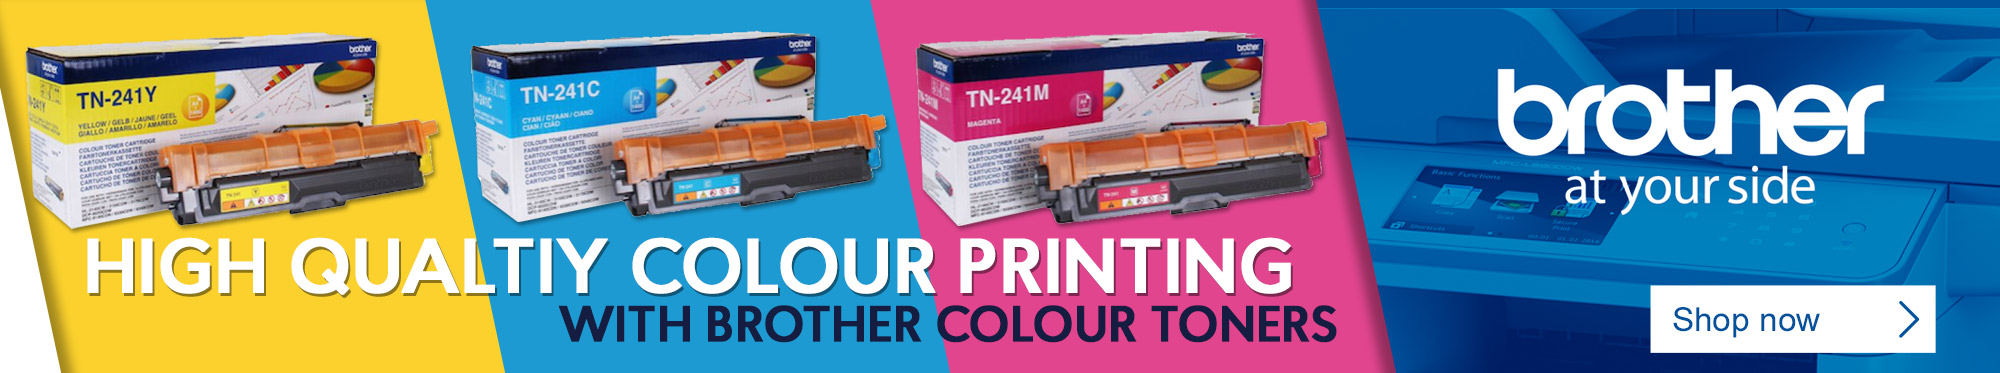 High Quality Colour Printing with Brother Colour Toners